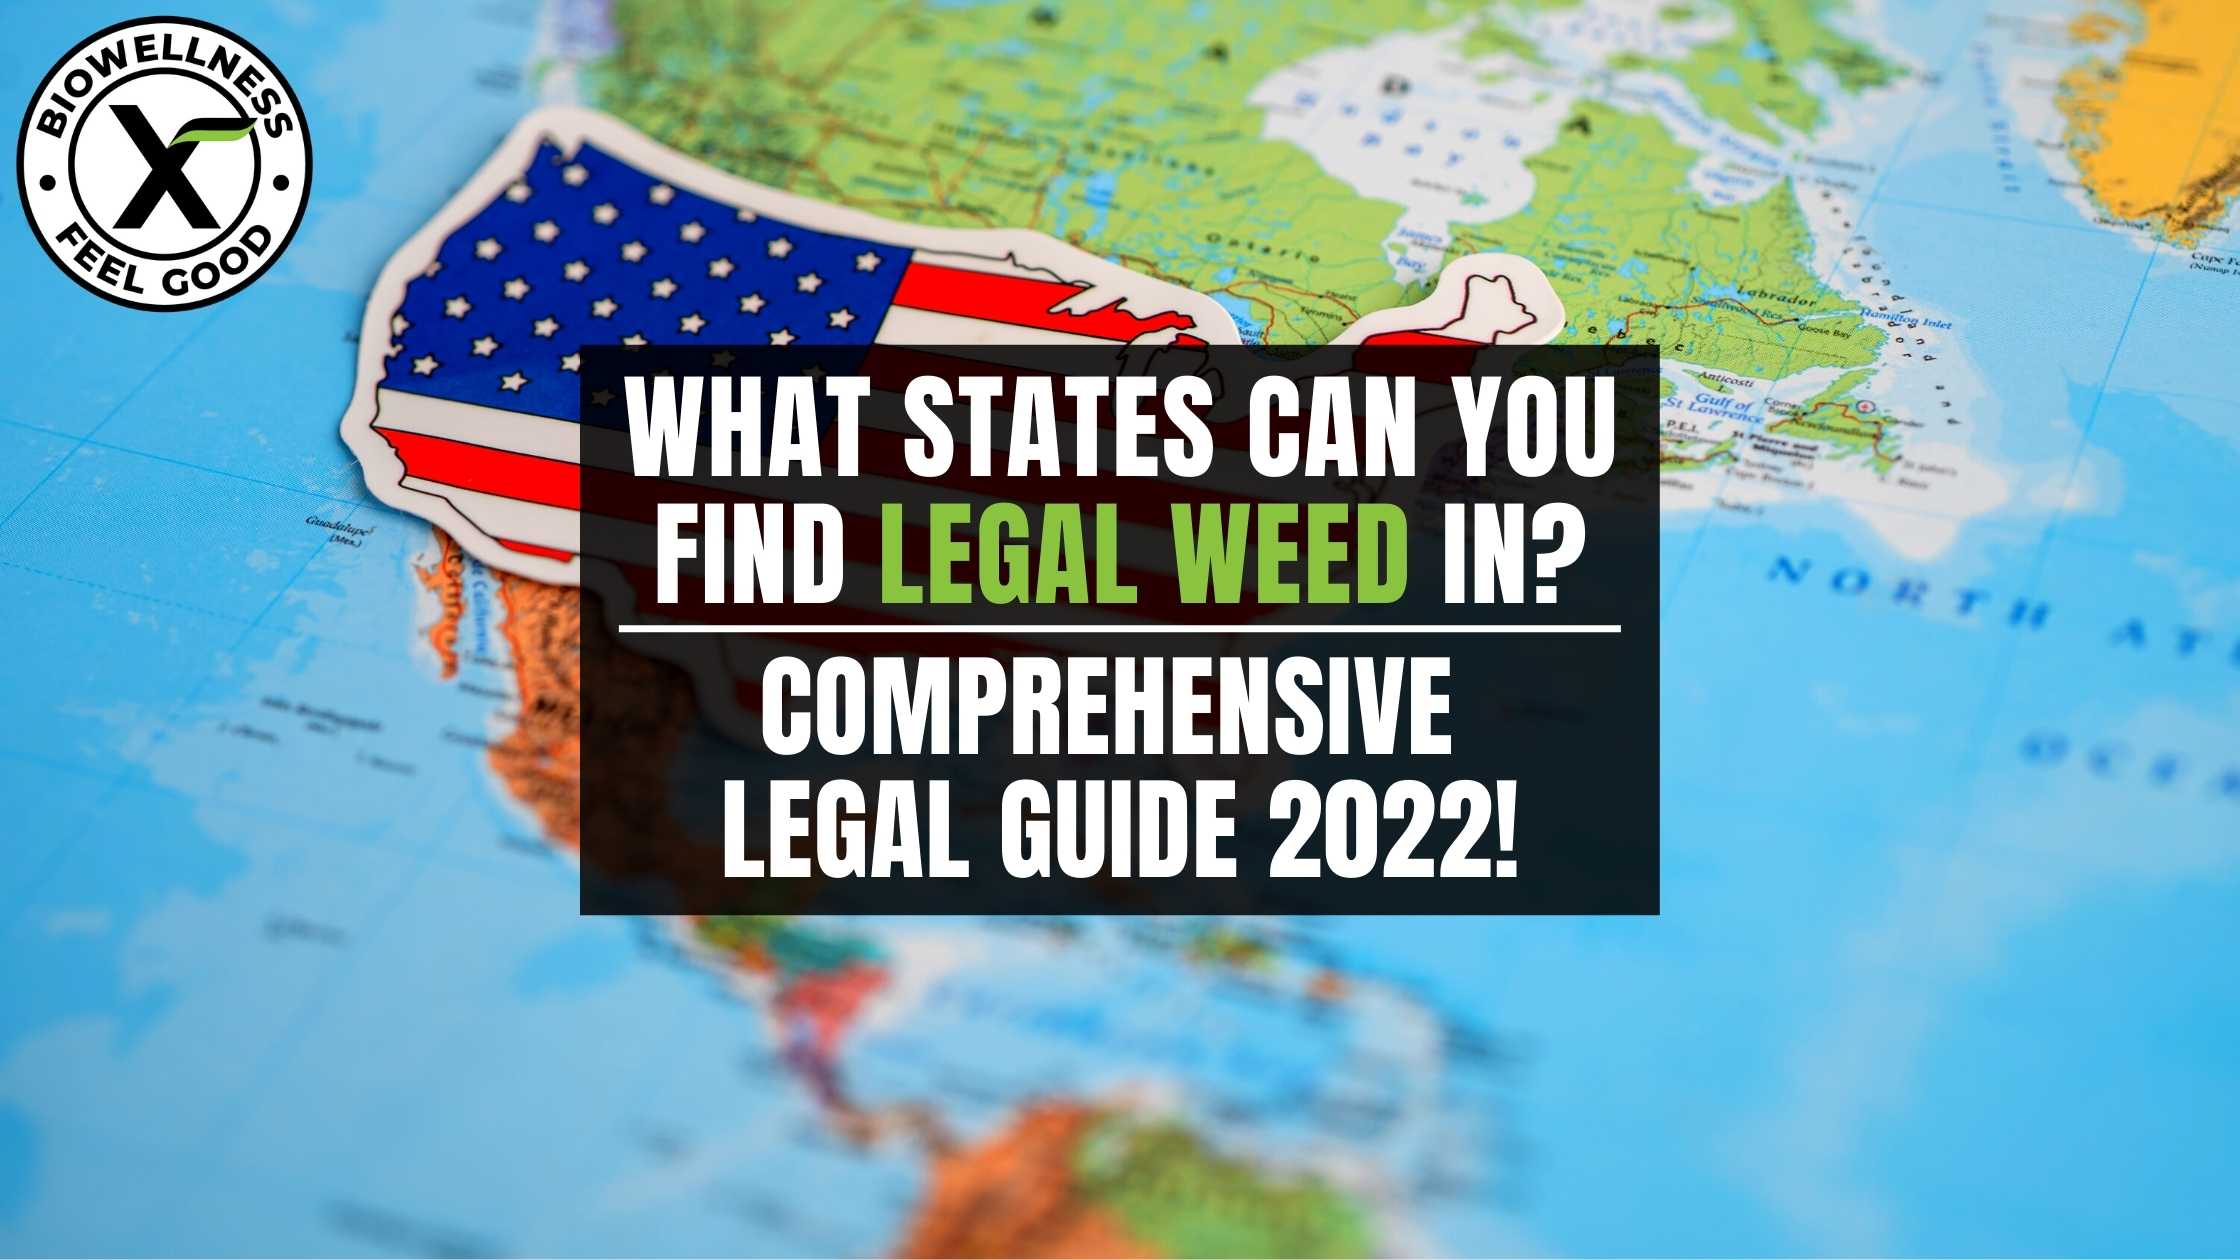 What States Can You Find Legal Weed In